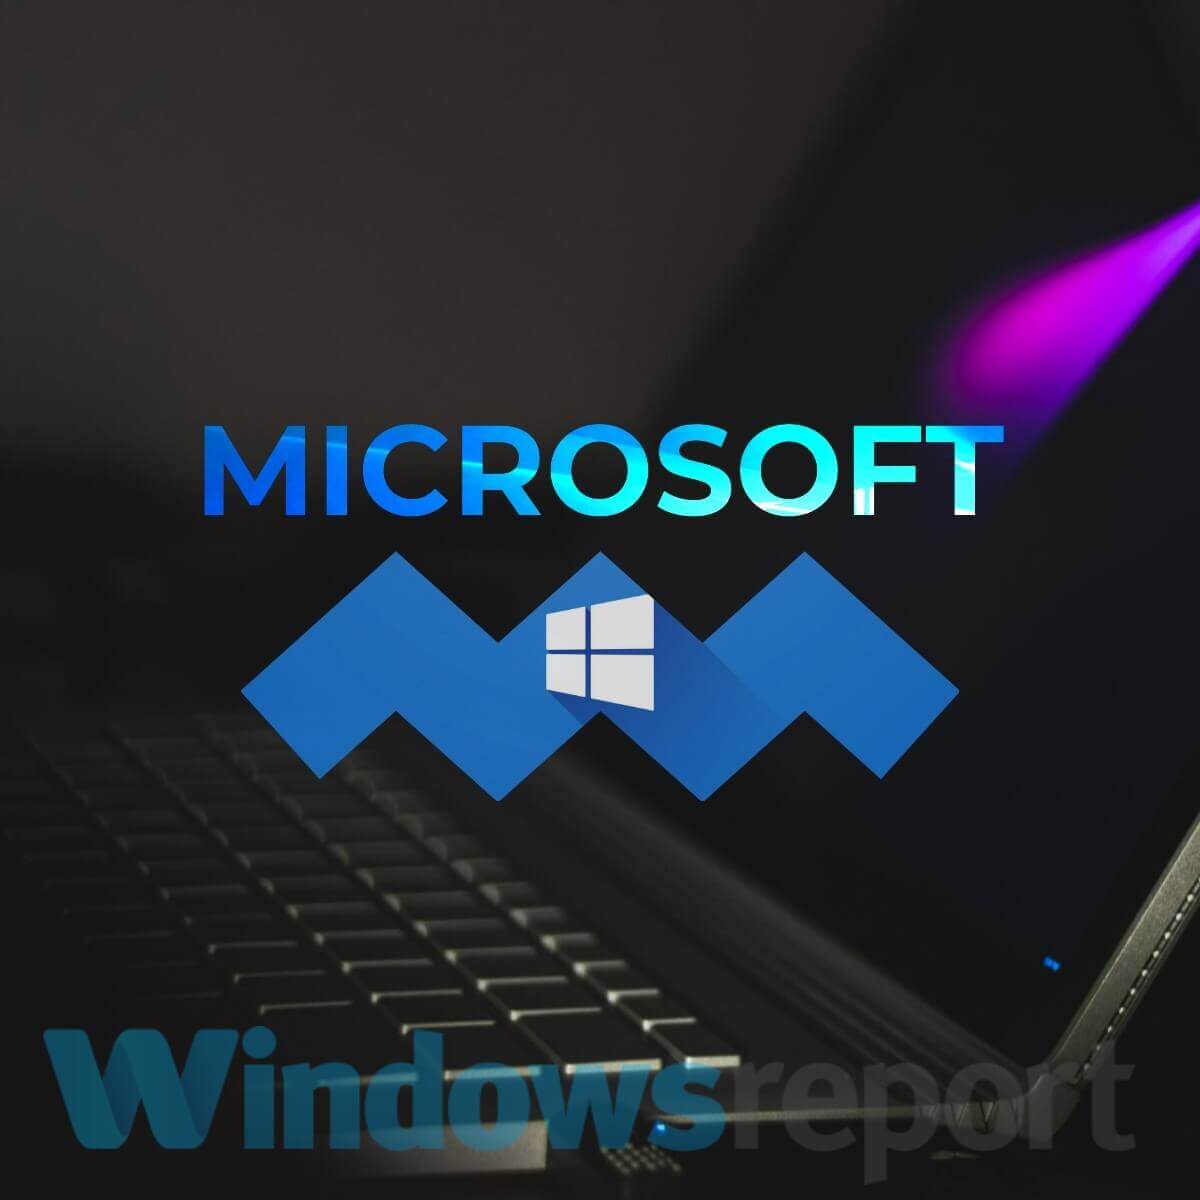 New Windows 10 19H2 builds out for some lucky Slow Ring Insiders